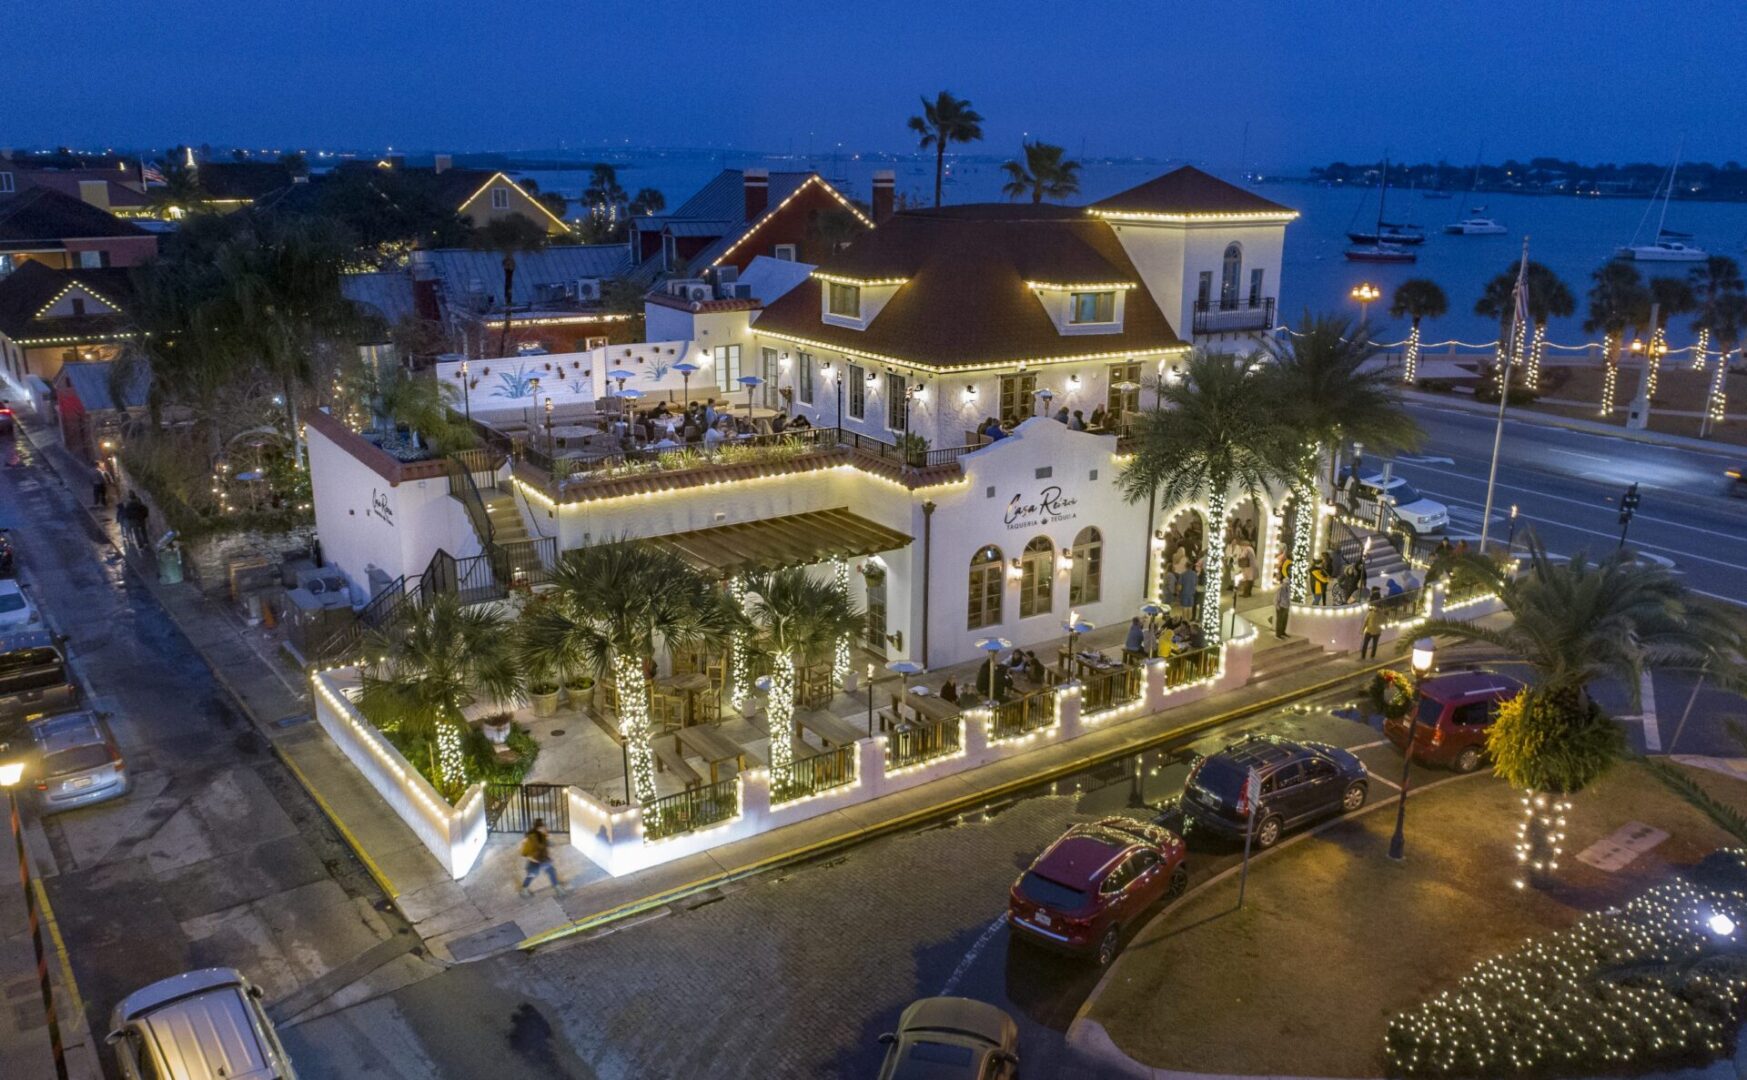 Top view of the casa restaurant with parking